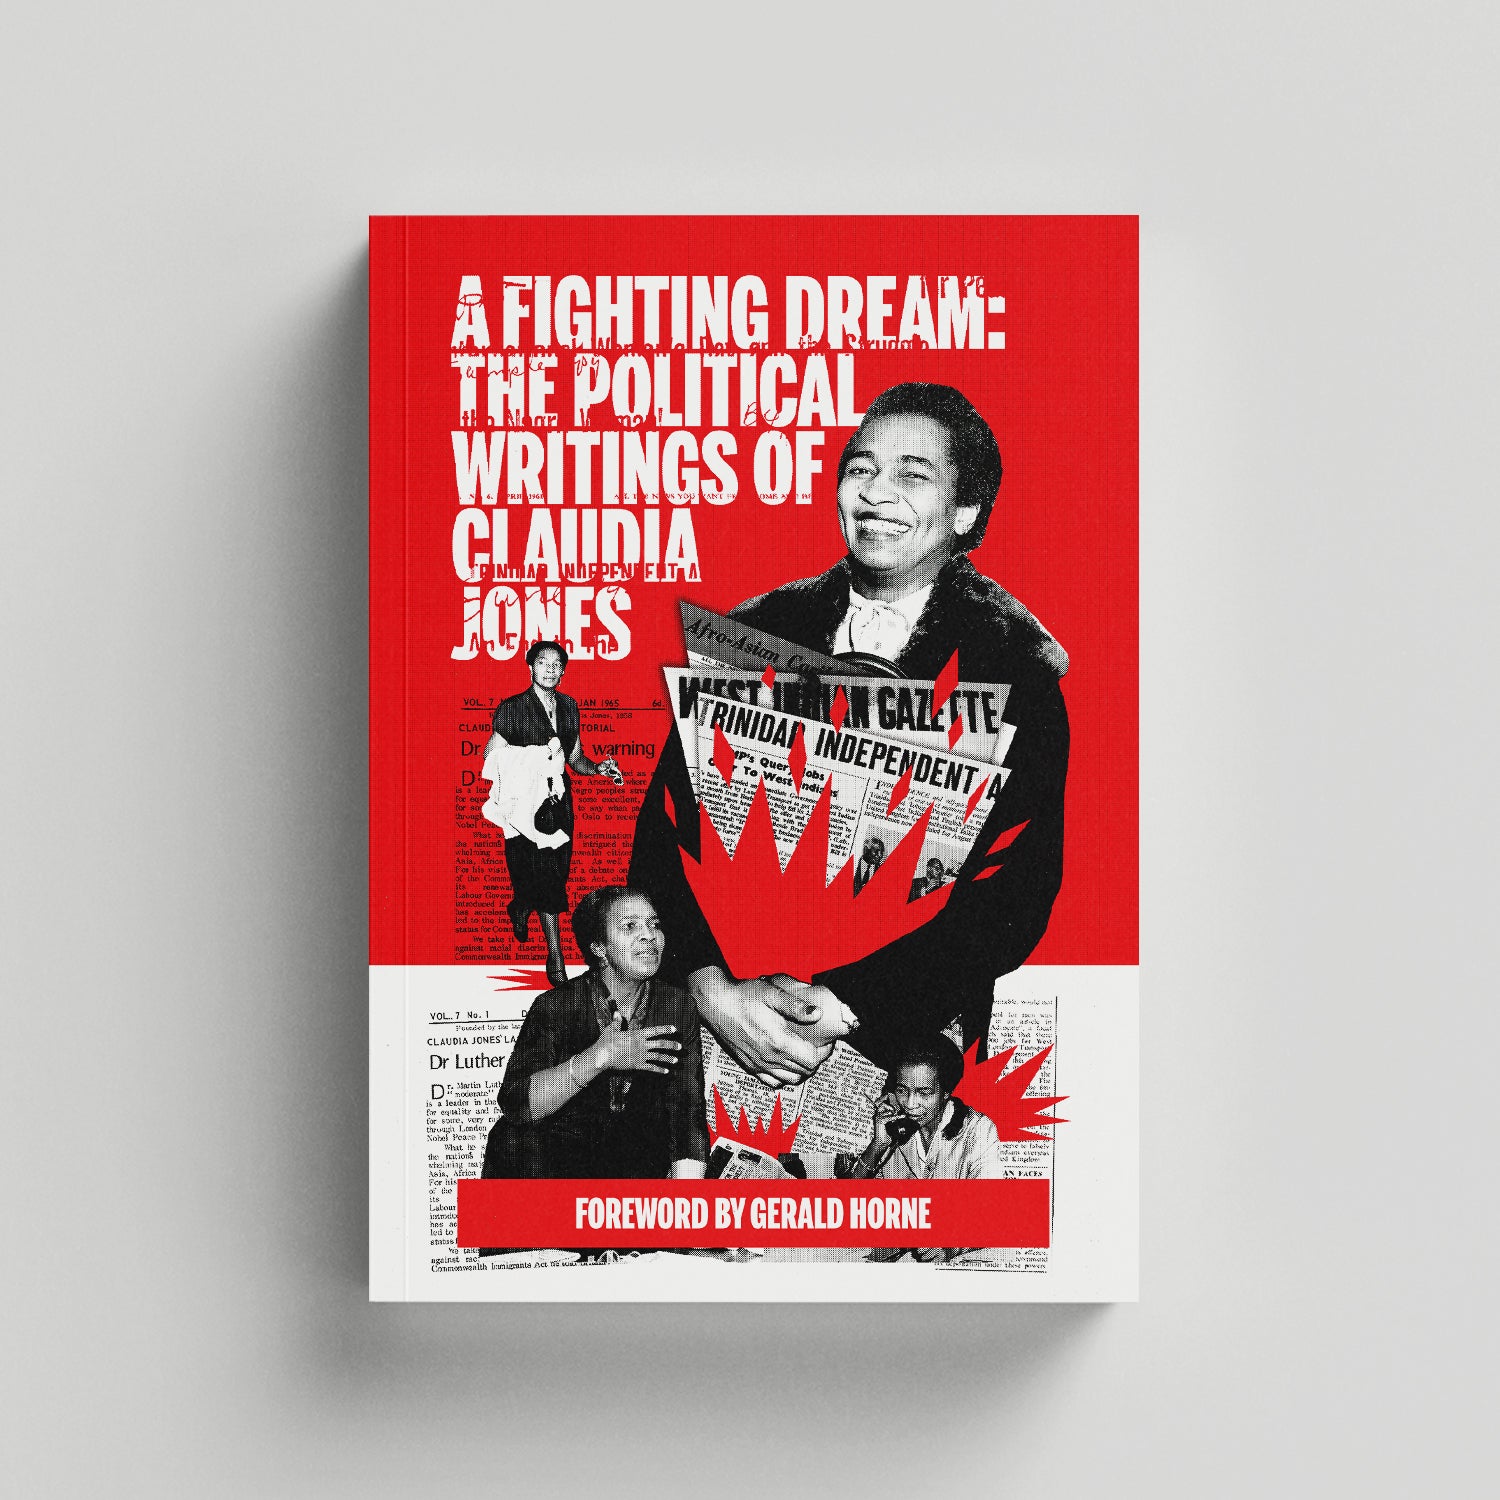 A Fighting Dream: The Political Writings of Claudia Jones